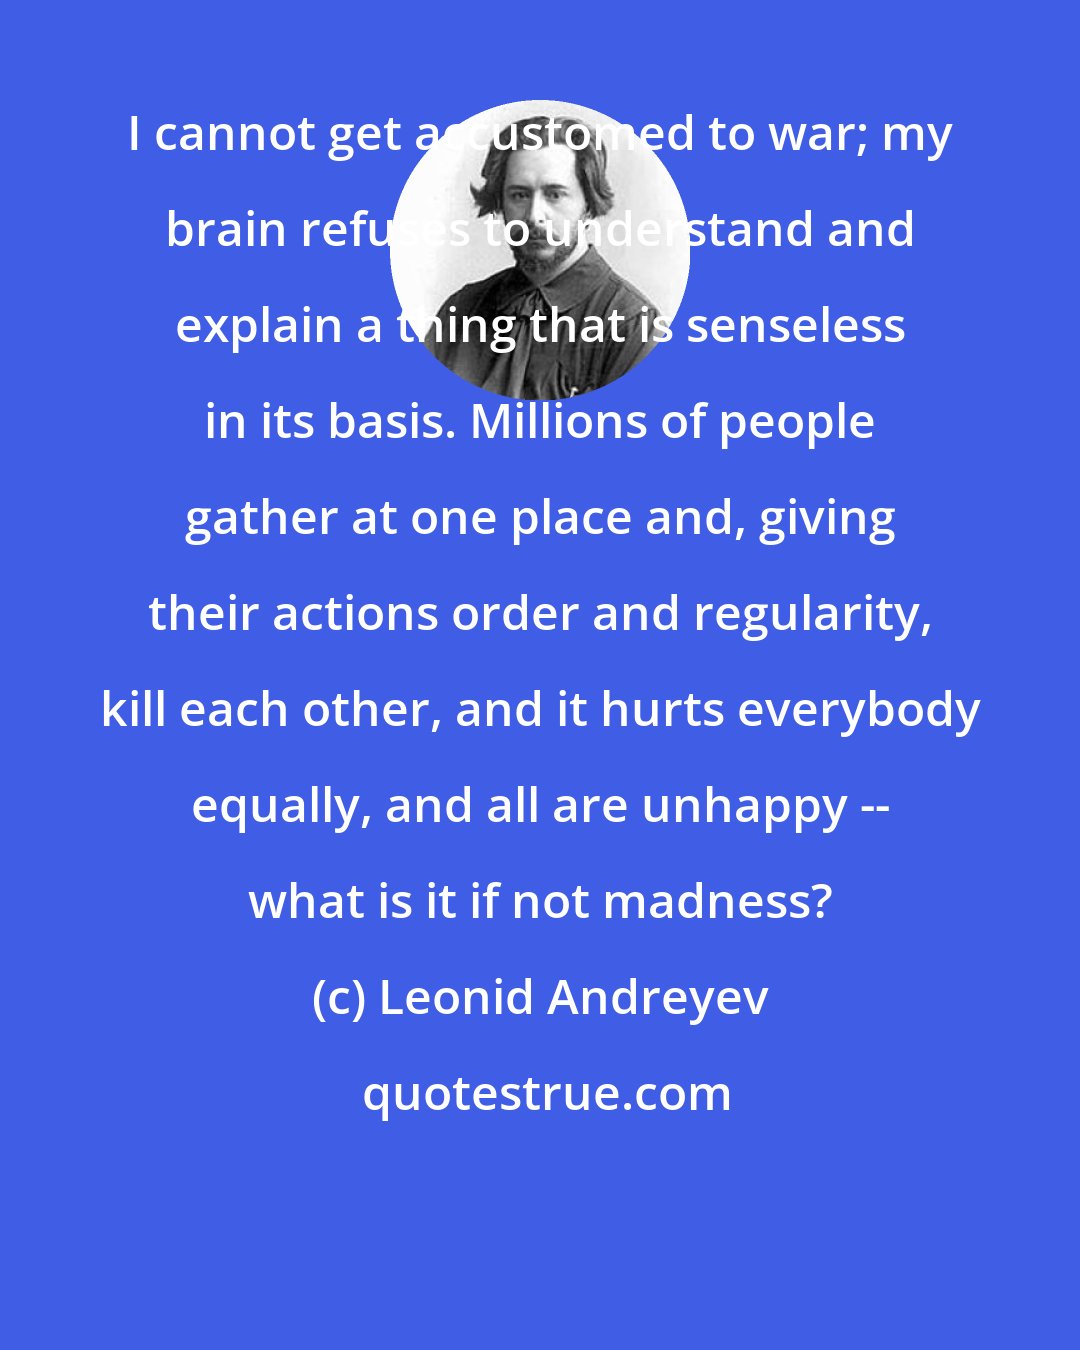 Leonid Andreyev: I cannot get accustomed to war; my brain refuses to understand and explain a thing that is senseless in its basis. Millions of people gather at one place and, giving their actions order and regularity, kill each other, and it hurts everybody equally, and all are unhappy -- what is it if not madness?